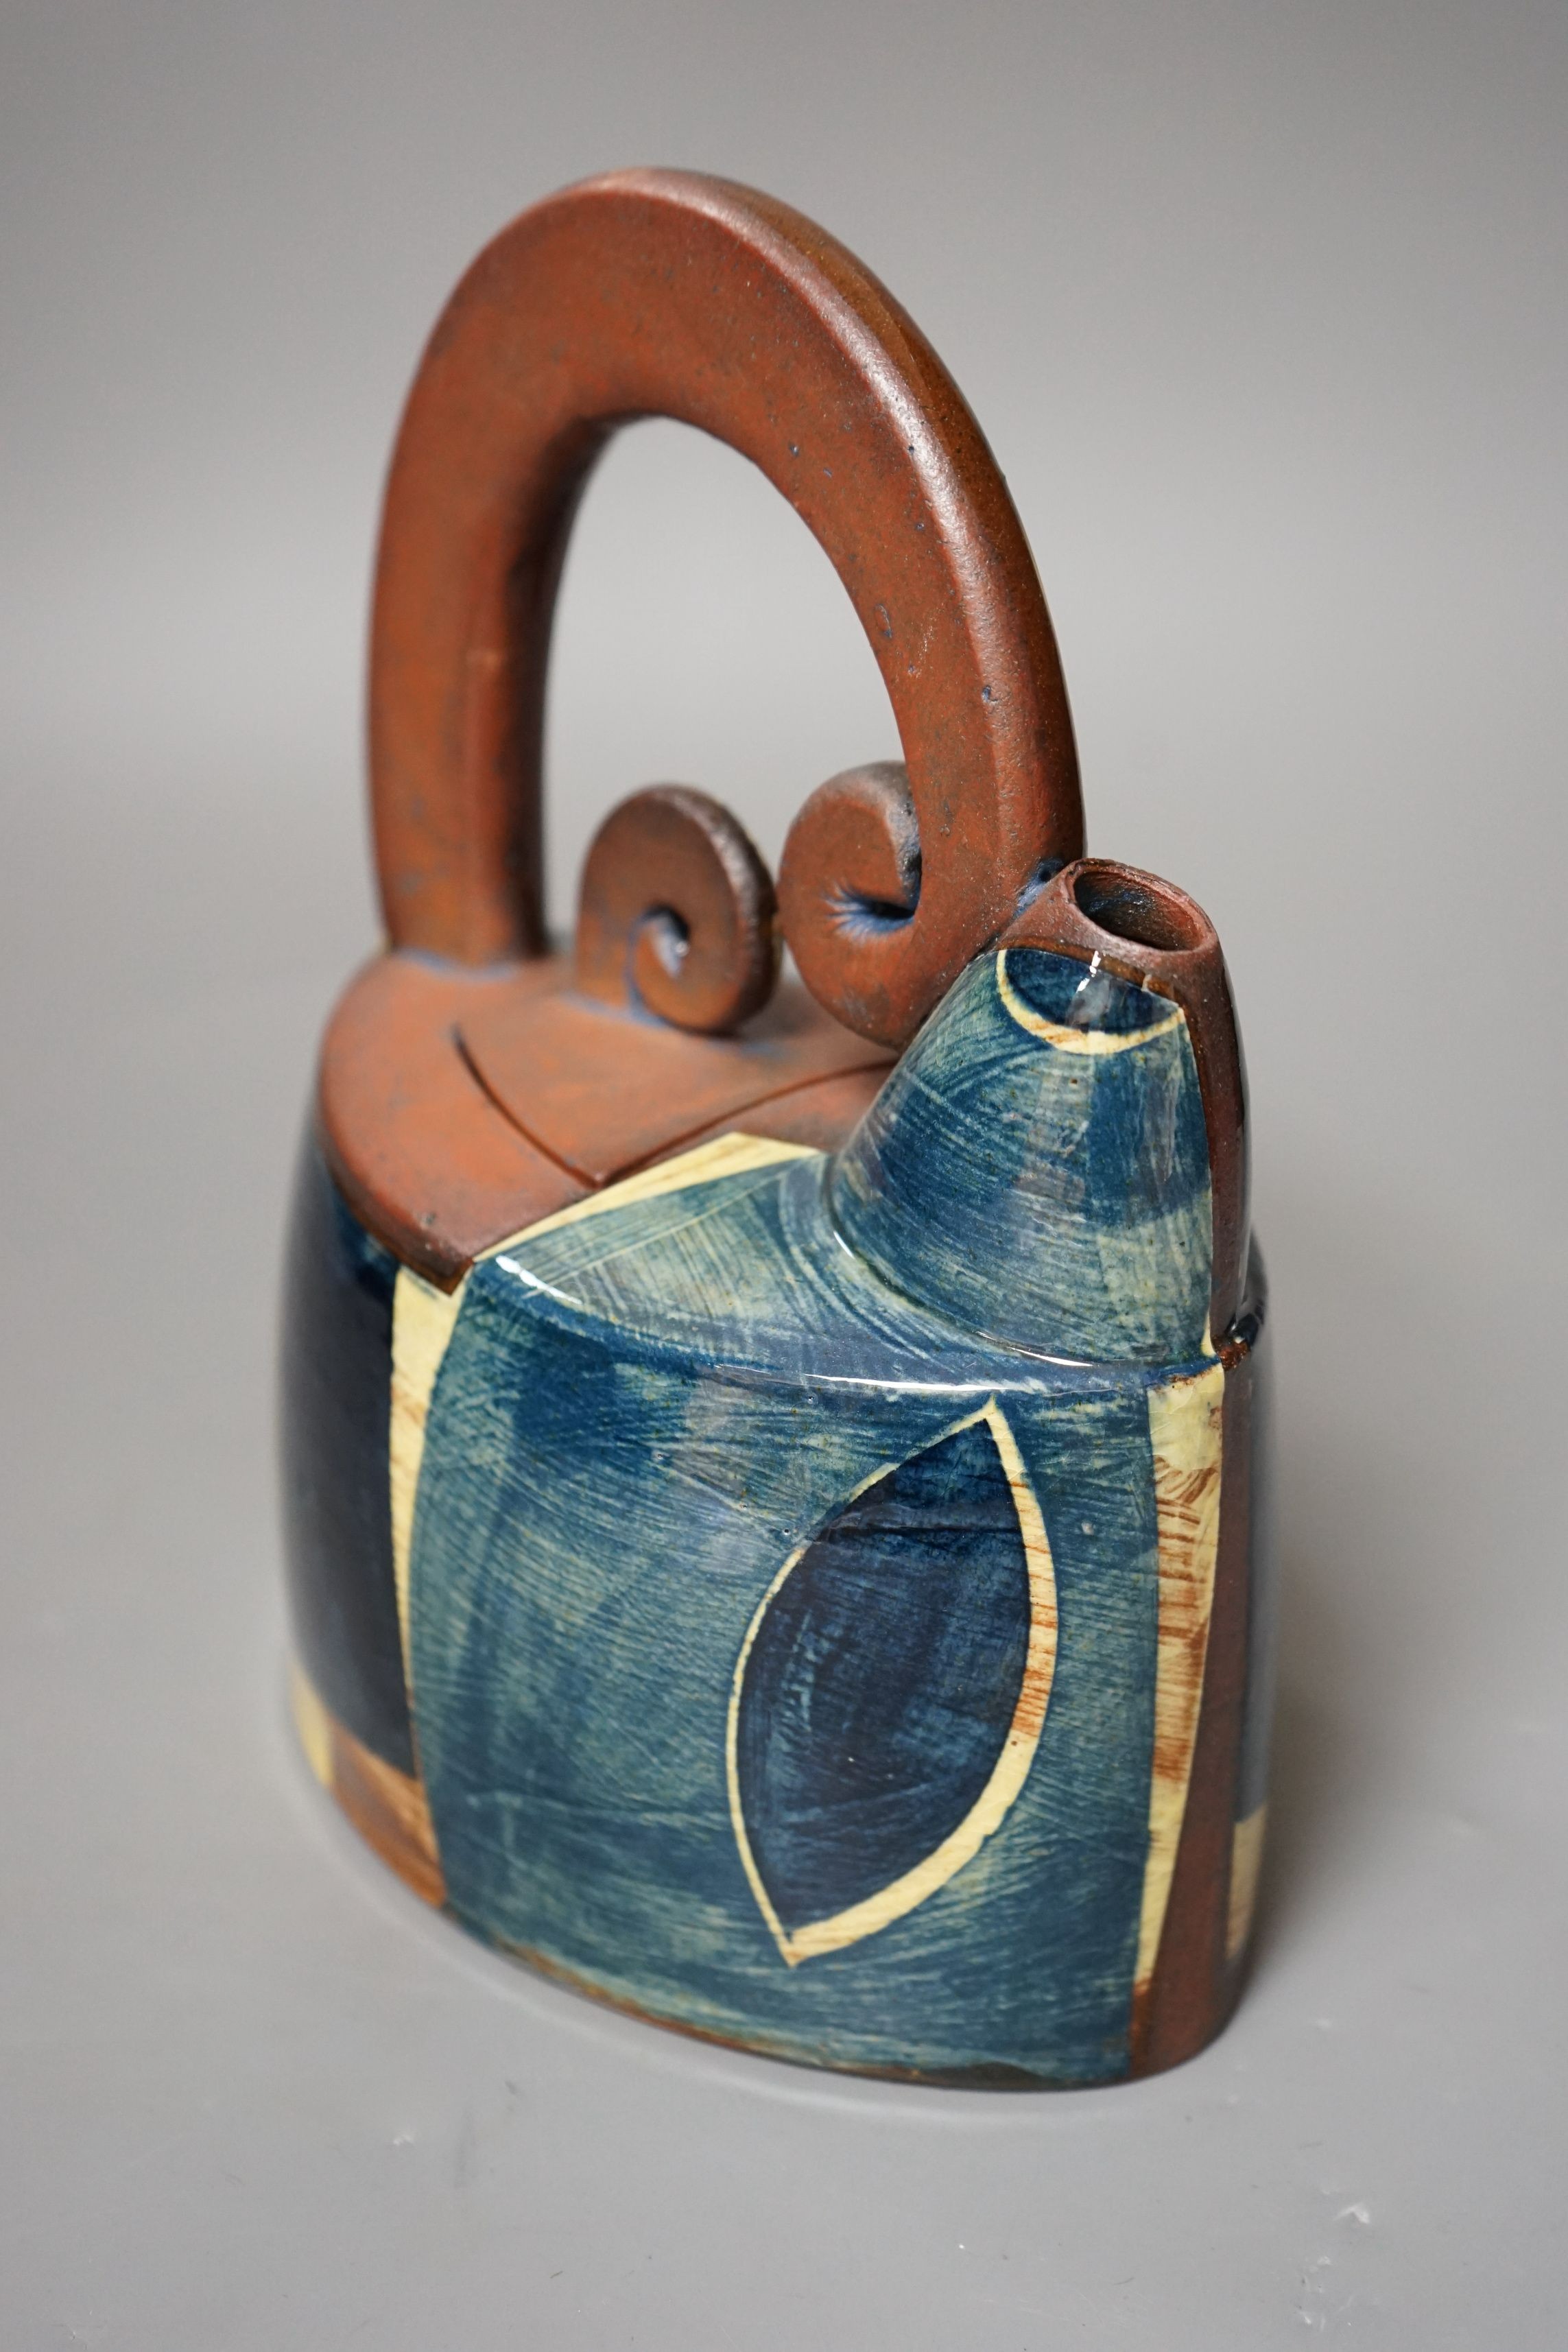 Richard Phethean (b.1953), an abstract green yellow and blue glazed earthenware teapot, purchased - Image 2 of 5